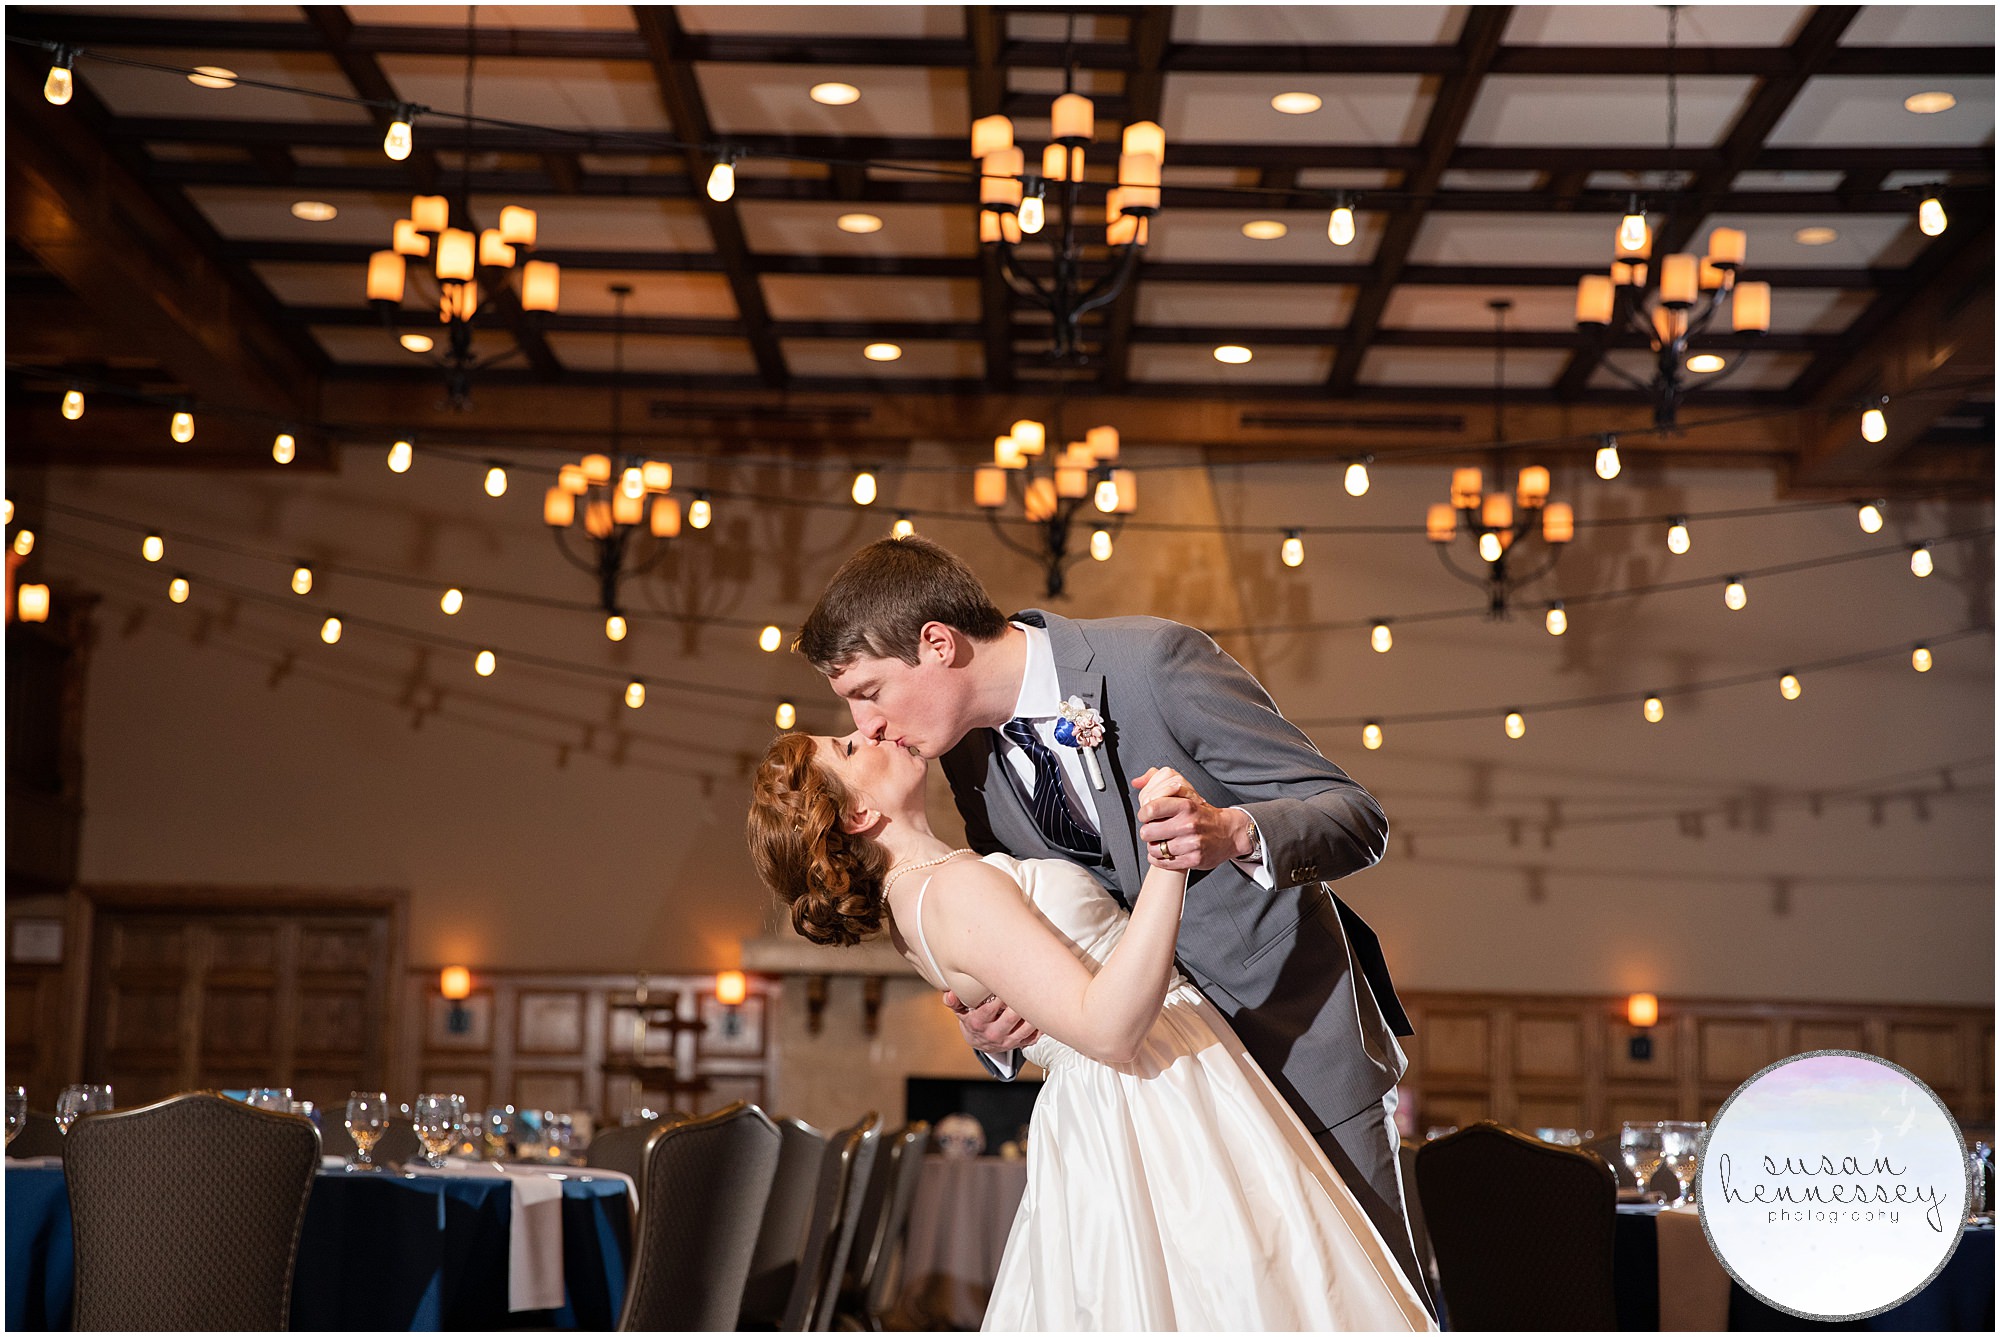 Susan Hennessey Photography Best of 2020 Weddings - The Community House of Moorestown ballroom portrait of bride and groom